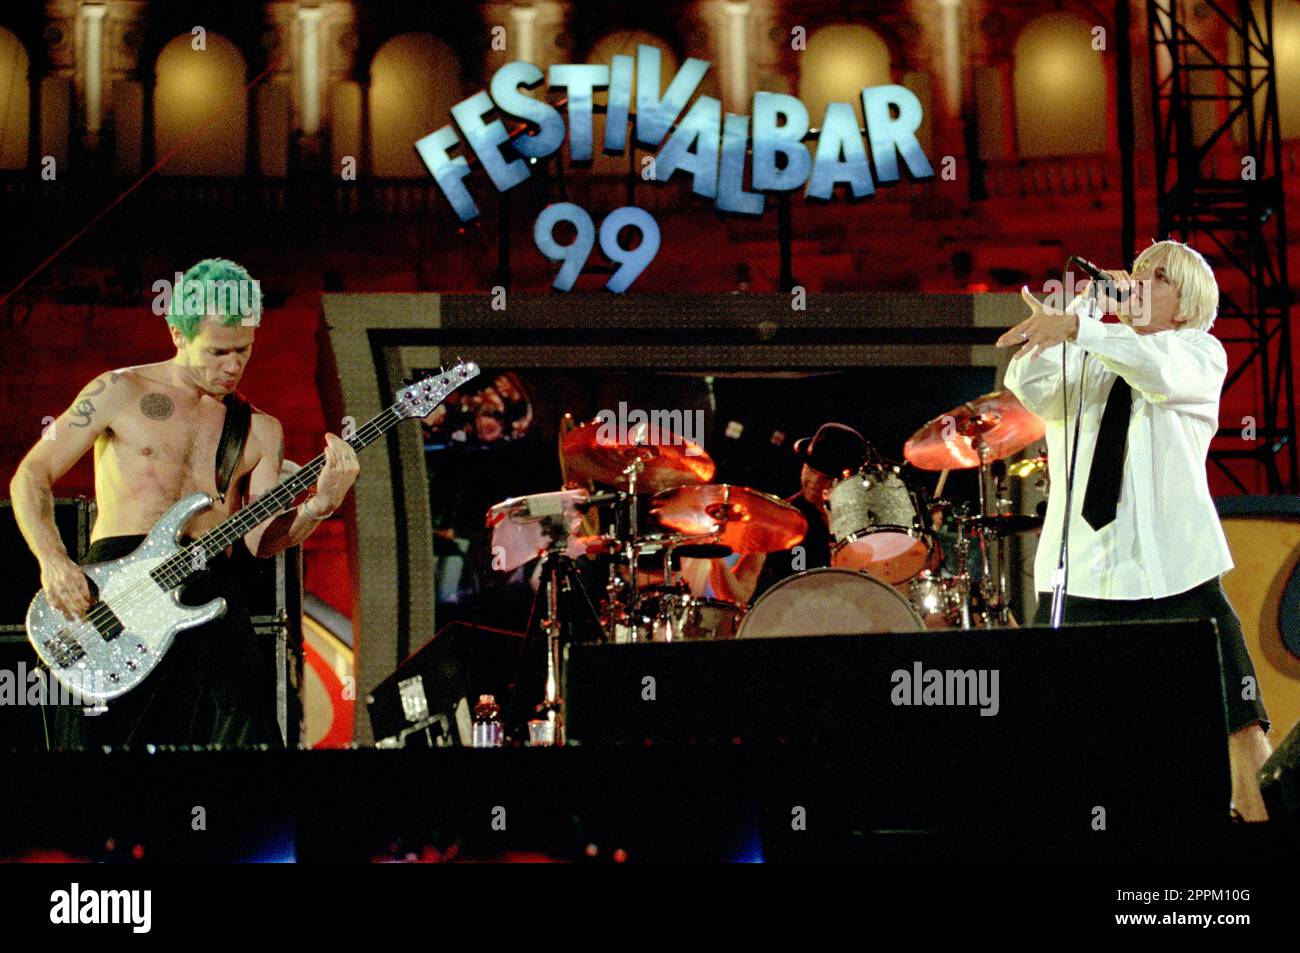 Verona Italy 1999-04-09: The Red Hot Chili Peppers band at the Festivalbar at the Arena Stock Photo